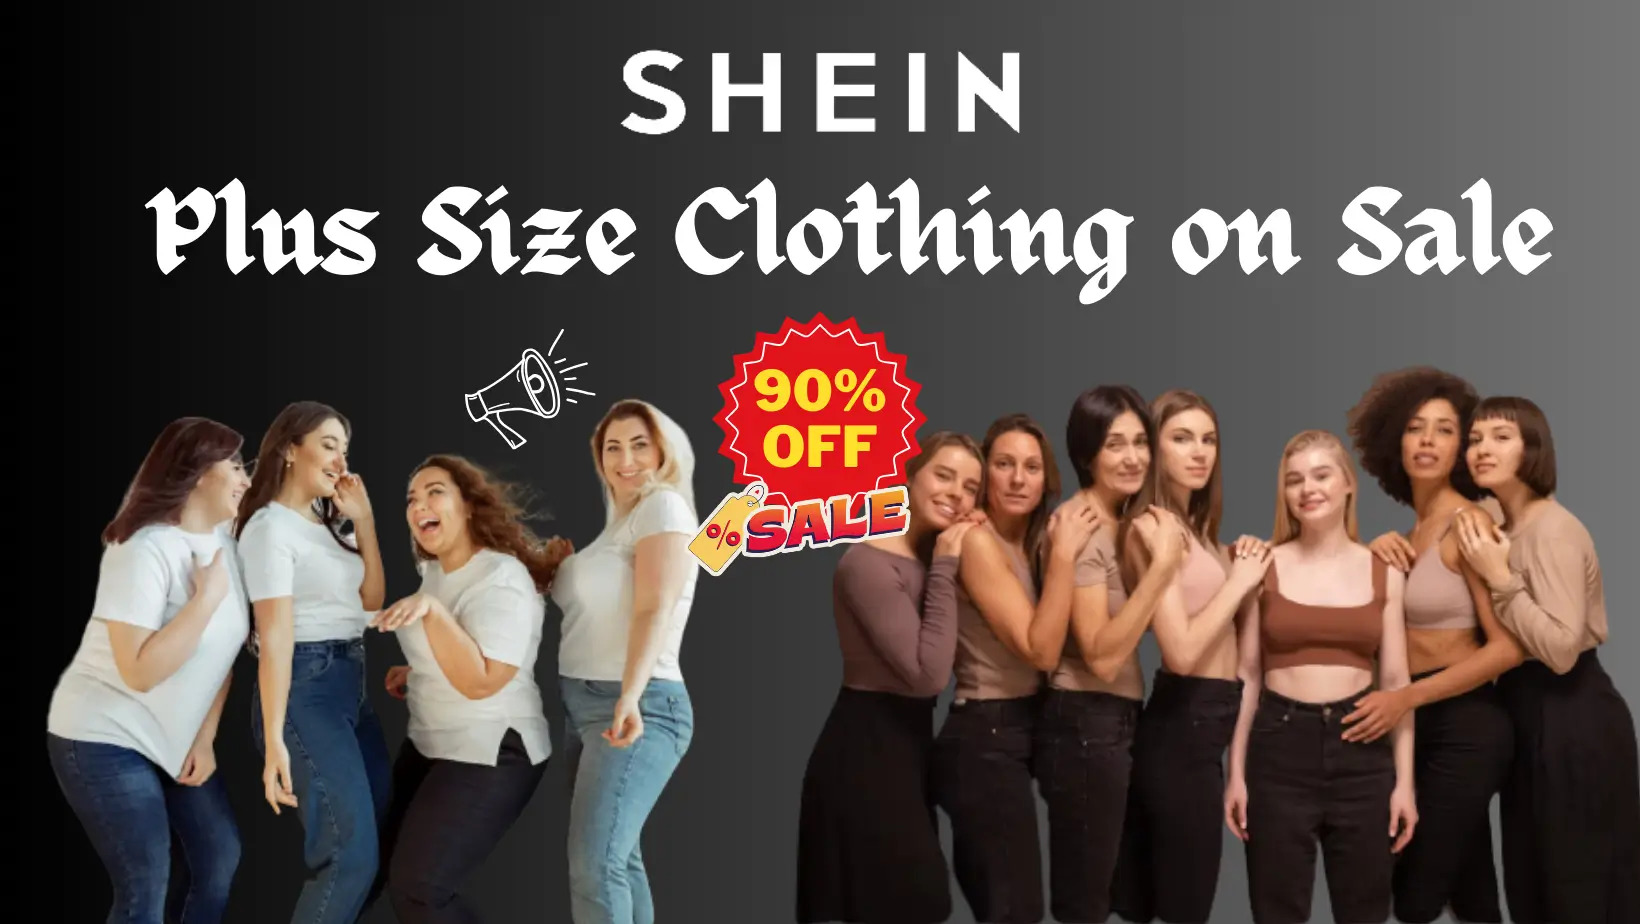 Best Shein Coupon Hacks to get Plus Size Clothing on Sale